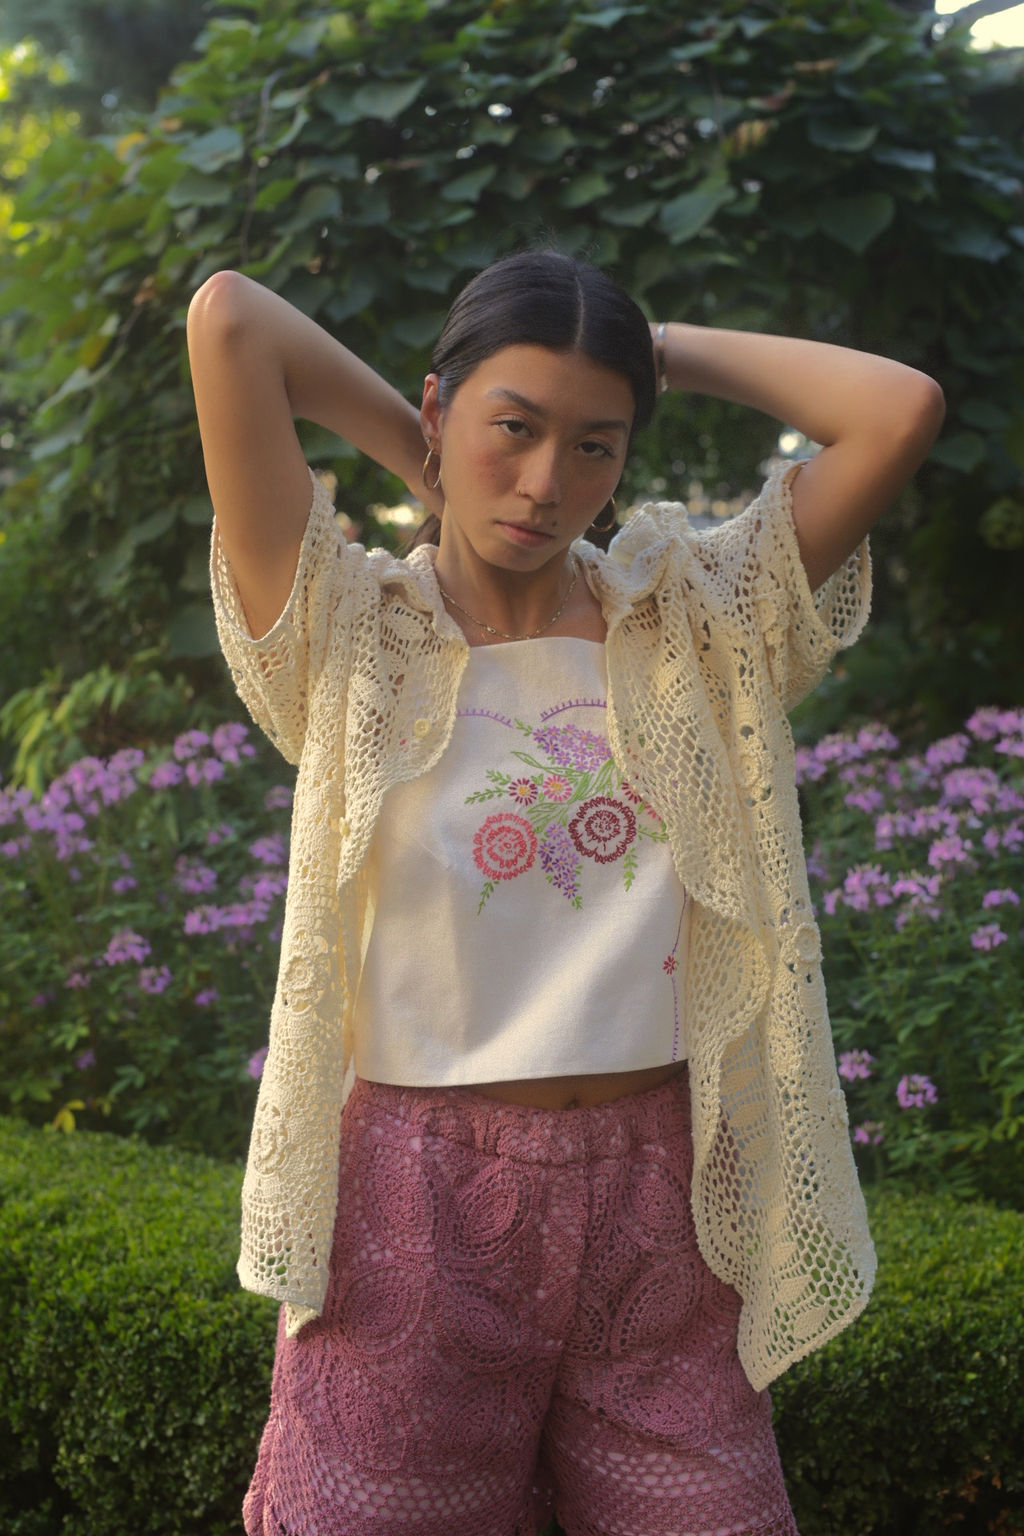 model wears floral embroidered top